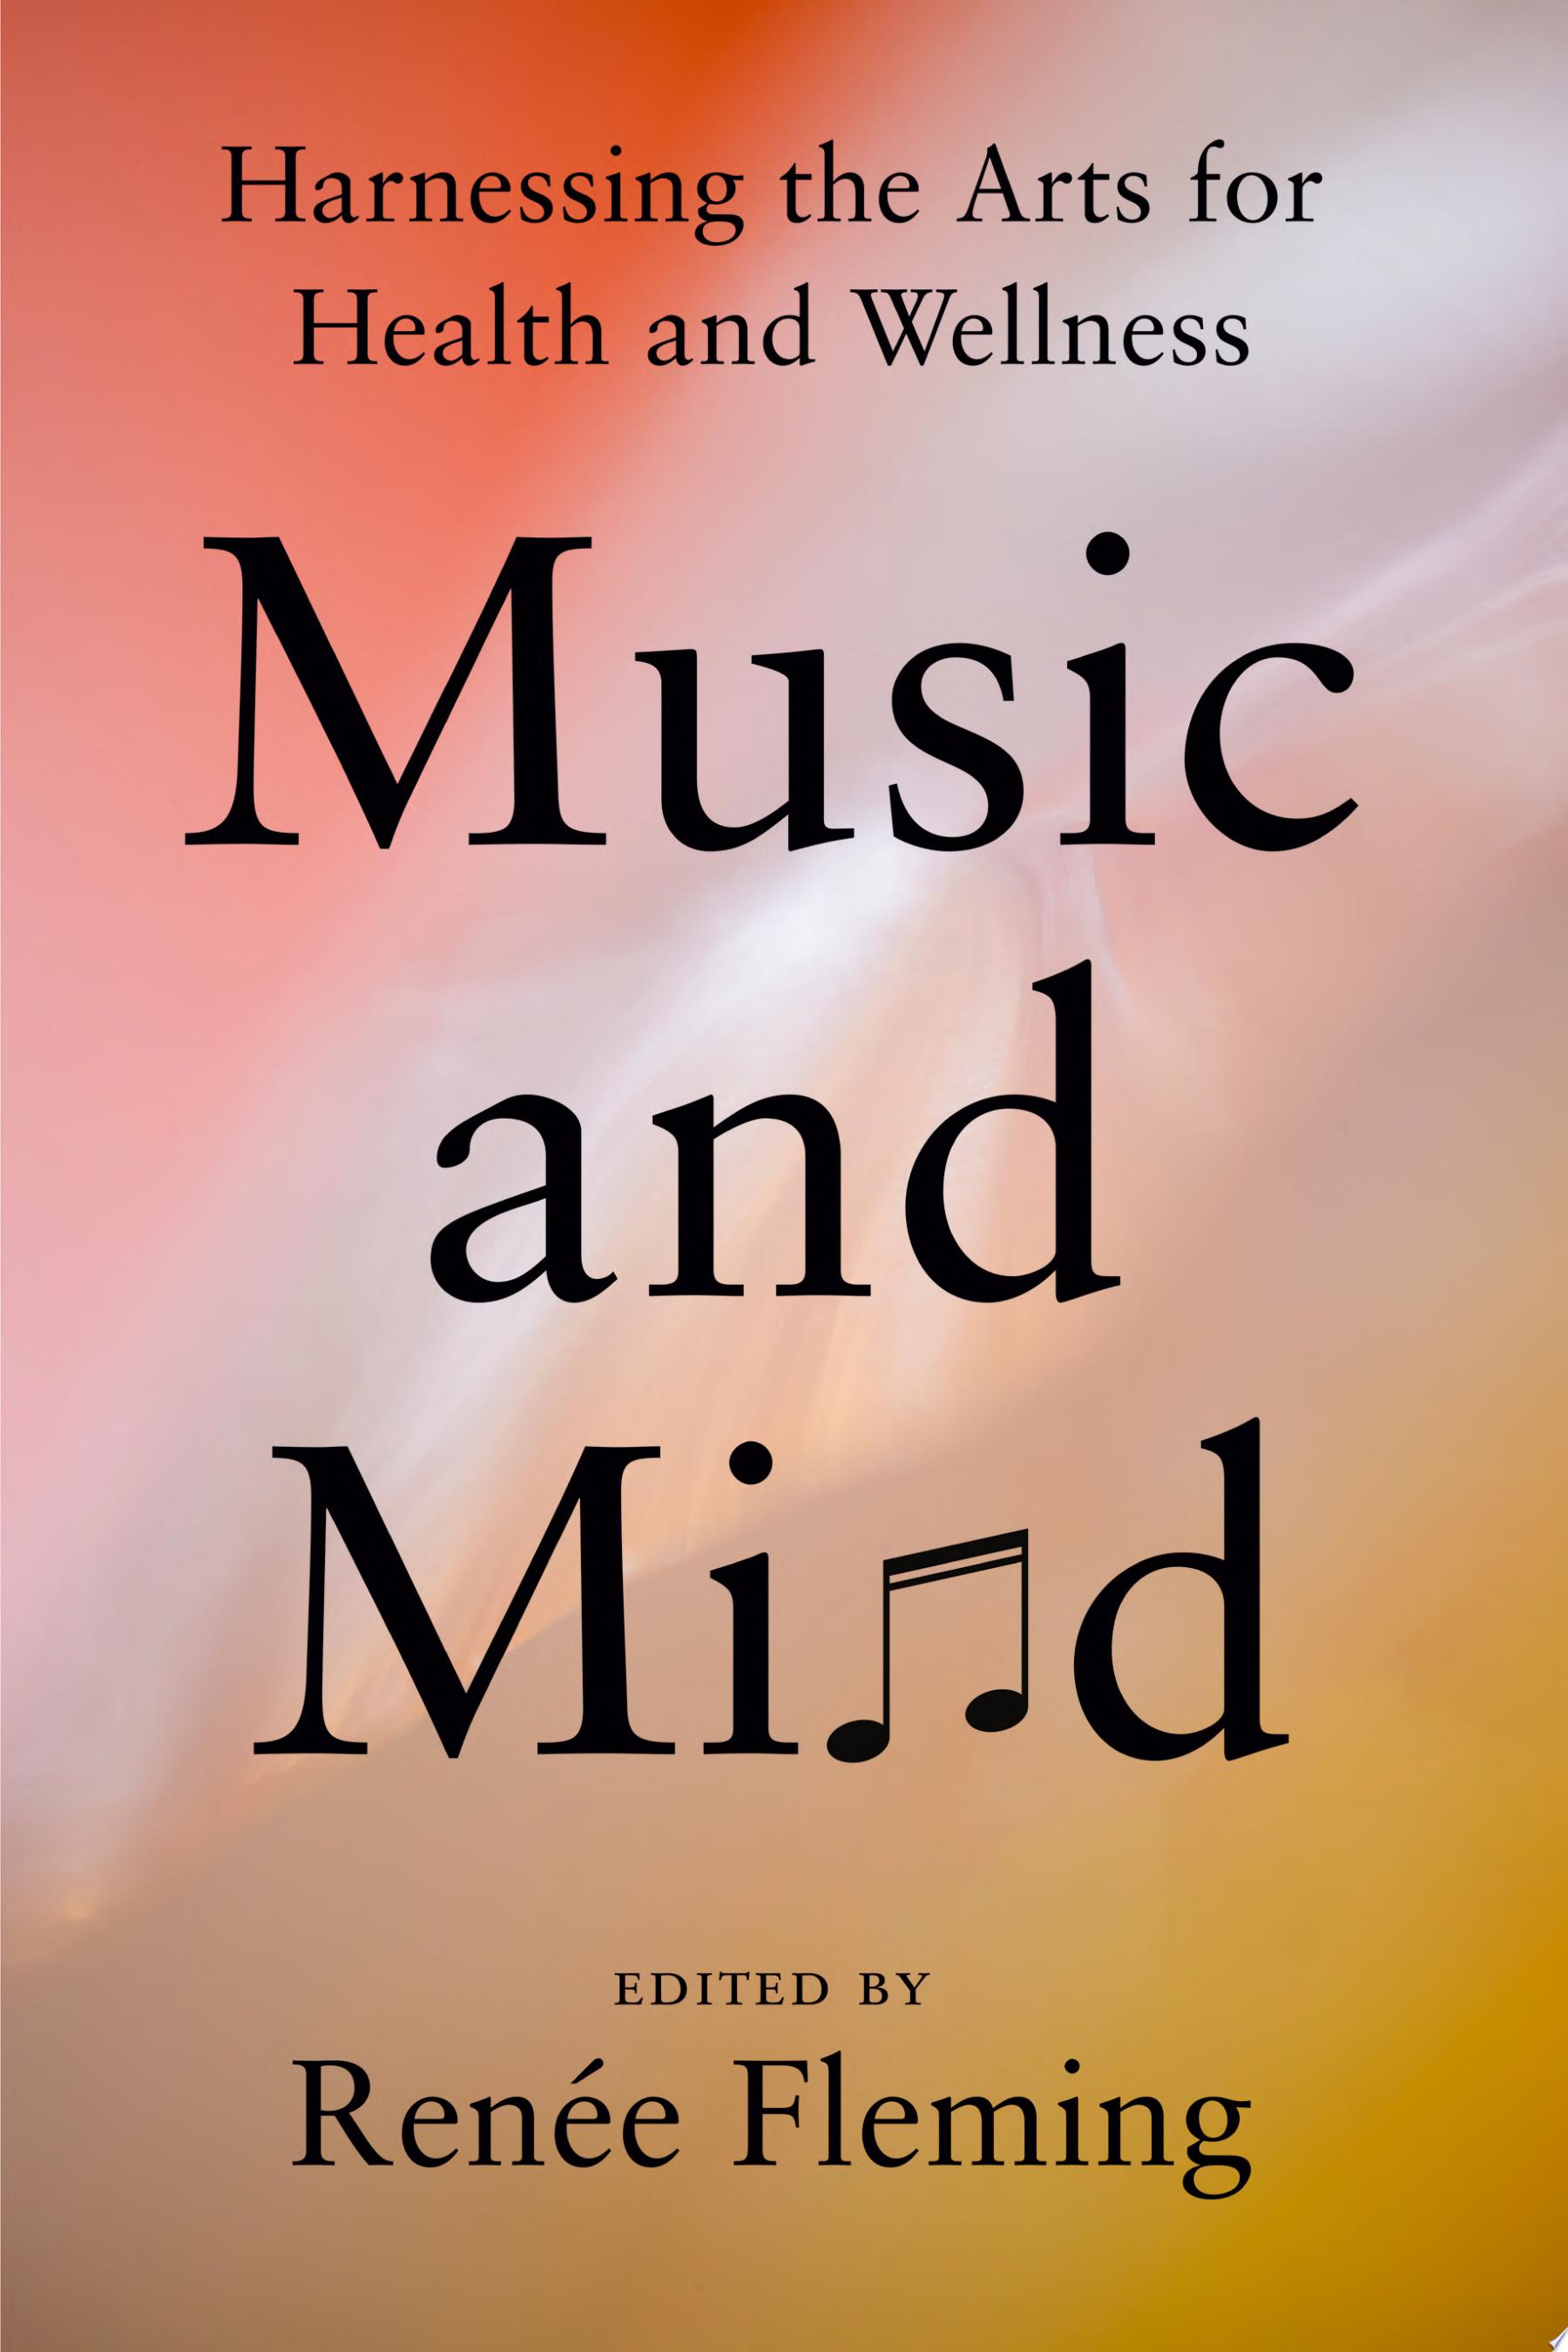 Image for "Music and Mind"